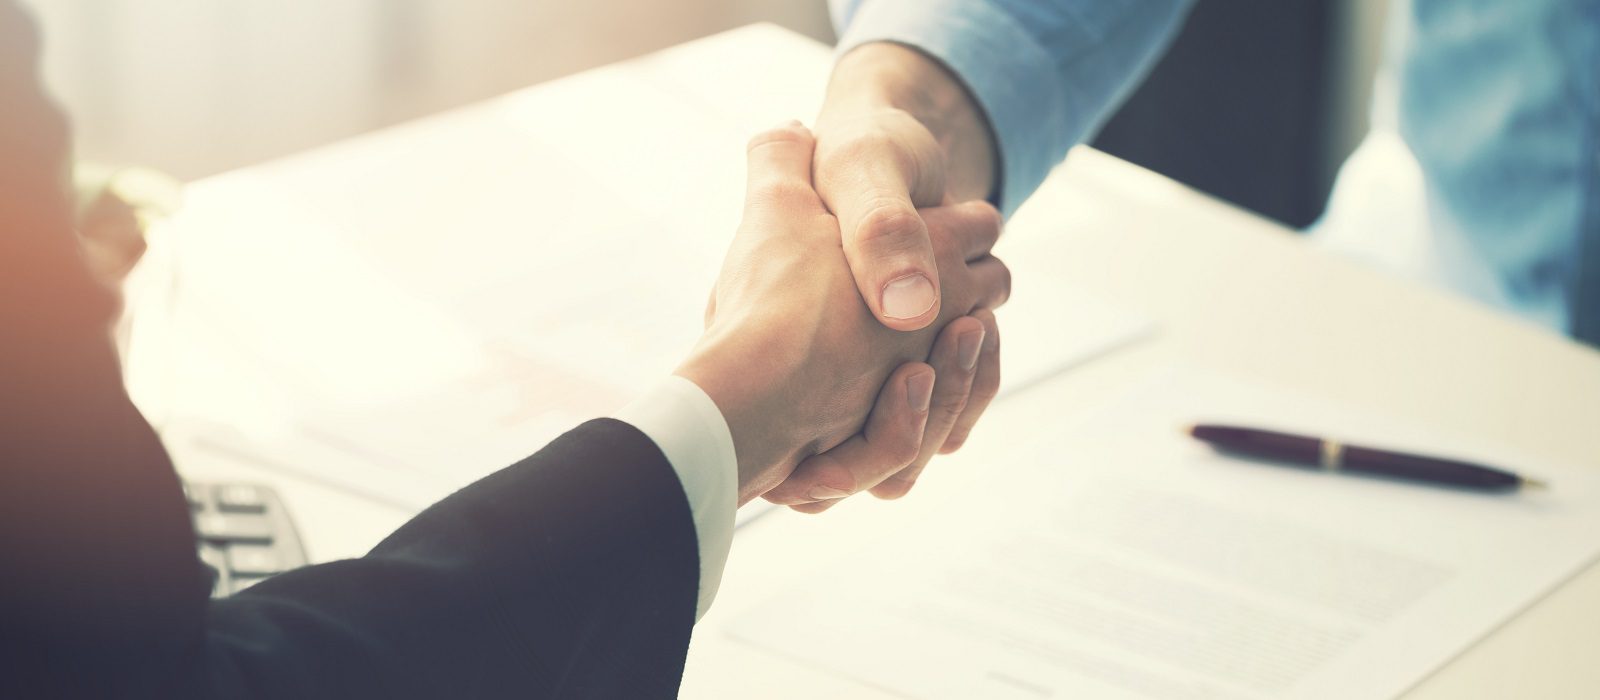 business people handshake after partnership contract signing